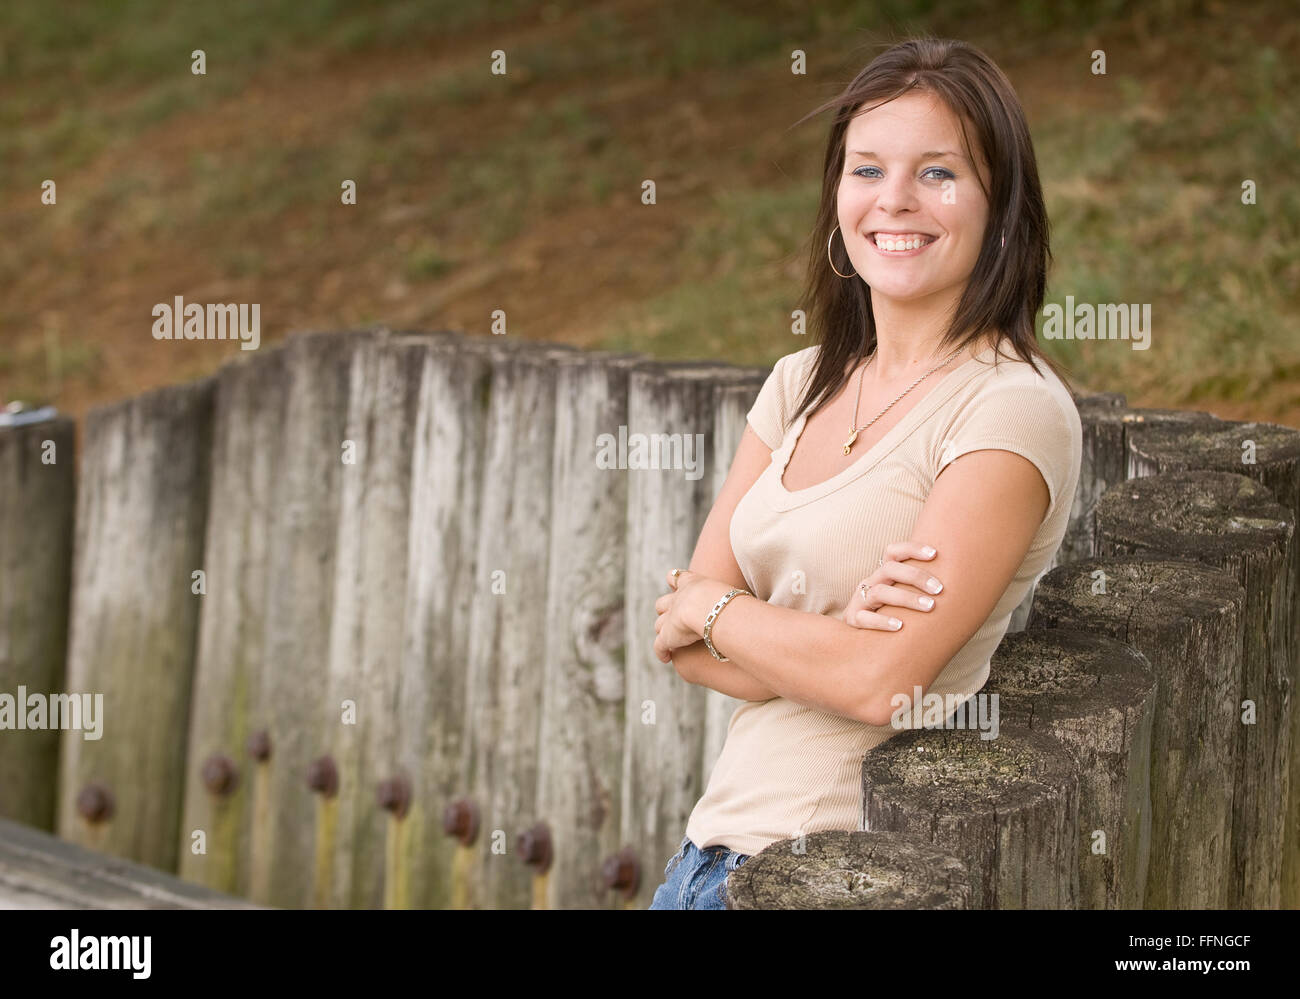 Outdoor Portrait of a Beautiful Young Woman Stock Photo